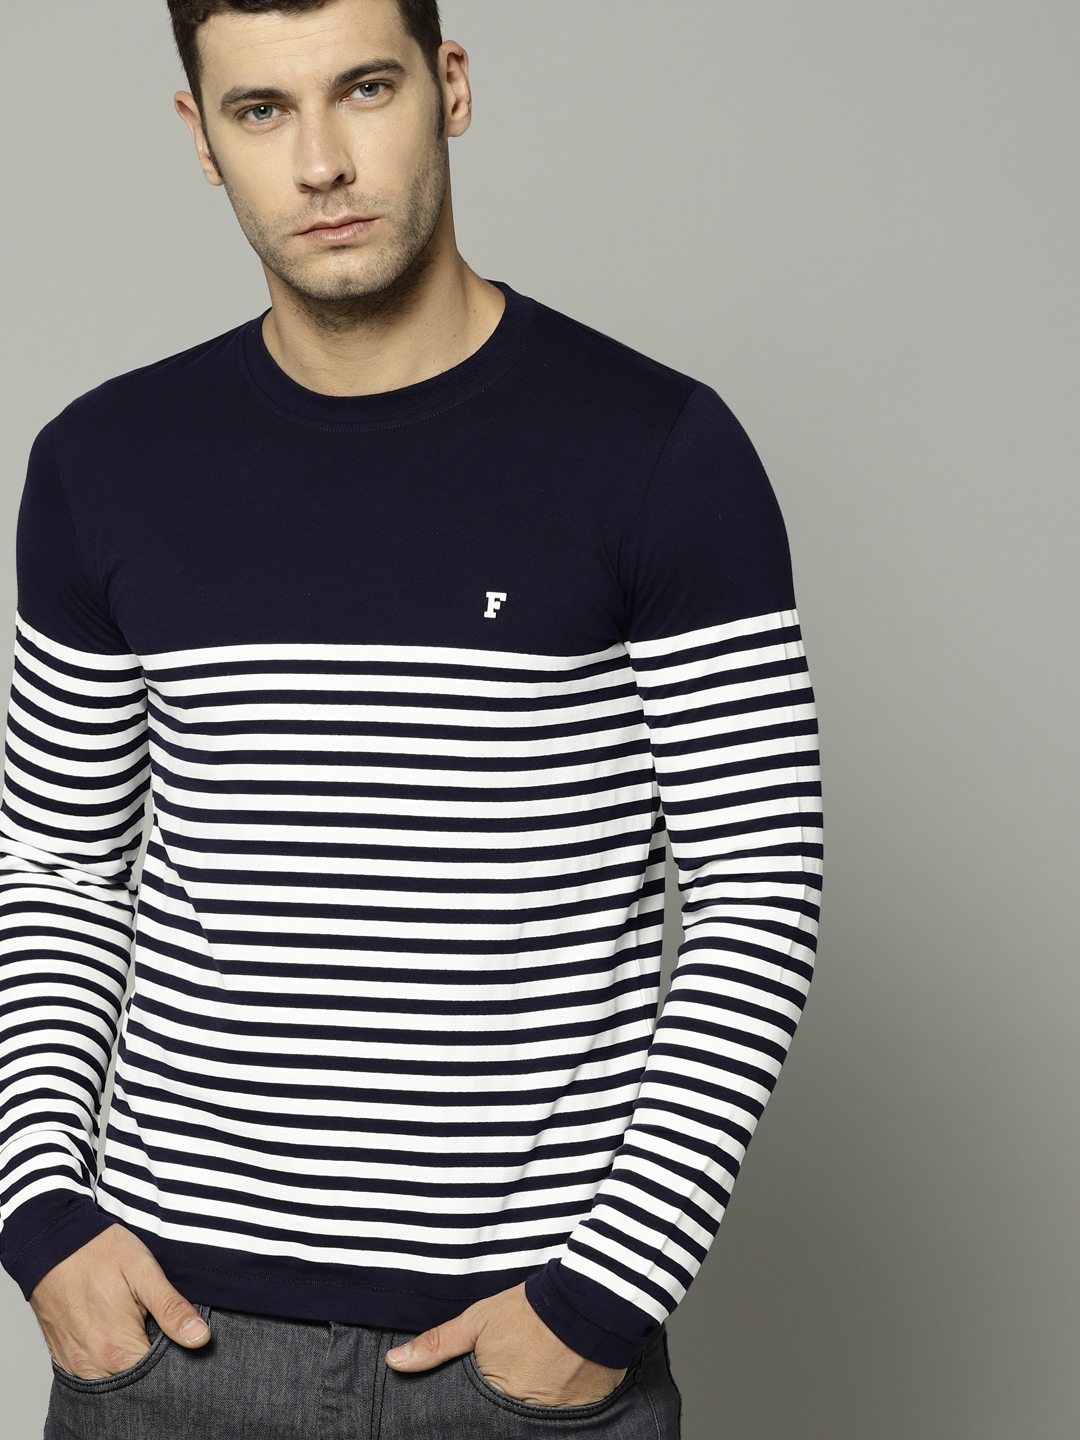 Buy French Connection Men Navy Blue & White Striped Round Neck T Shirt ...